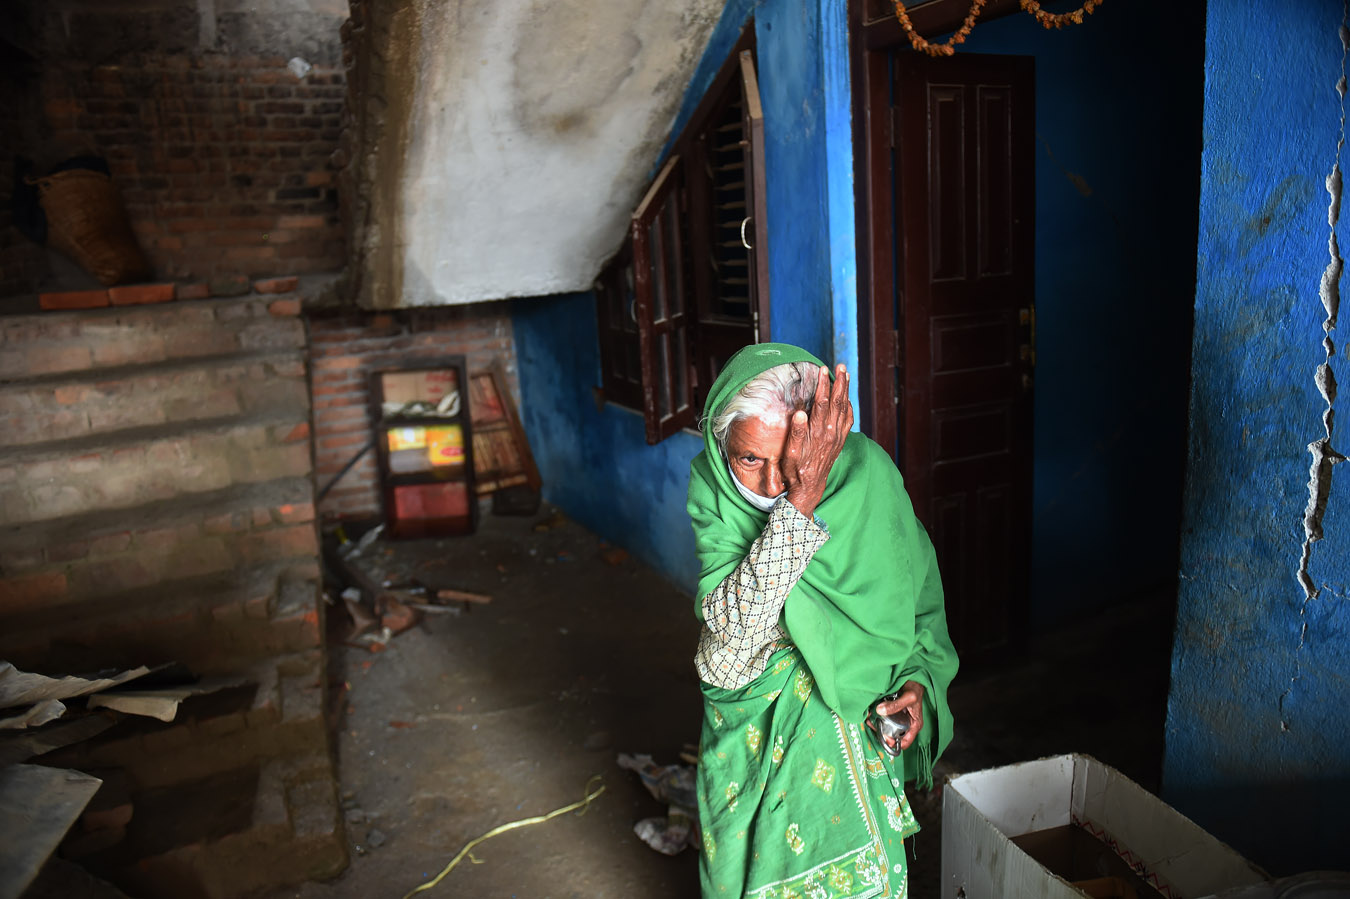 Sabitri Nepan wipes away a tear as she stands near her damaged home on Thursday April 30, 2015 in Kathmandu, Nepal. A deadly earthquake in Nepal has killed thousands. (Photo by Matt McClain/ The Washington Post)